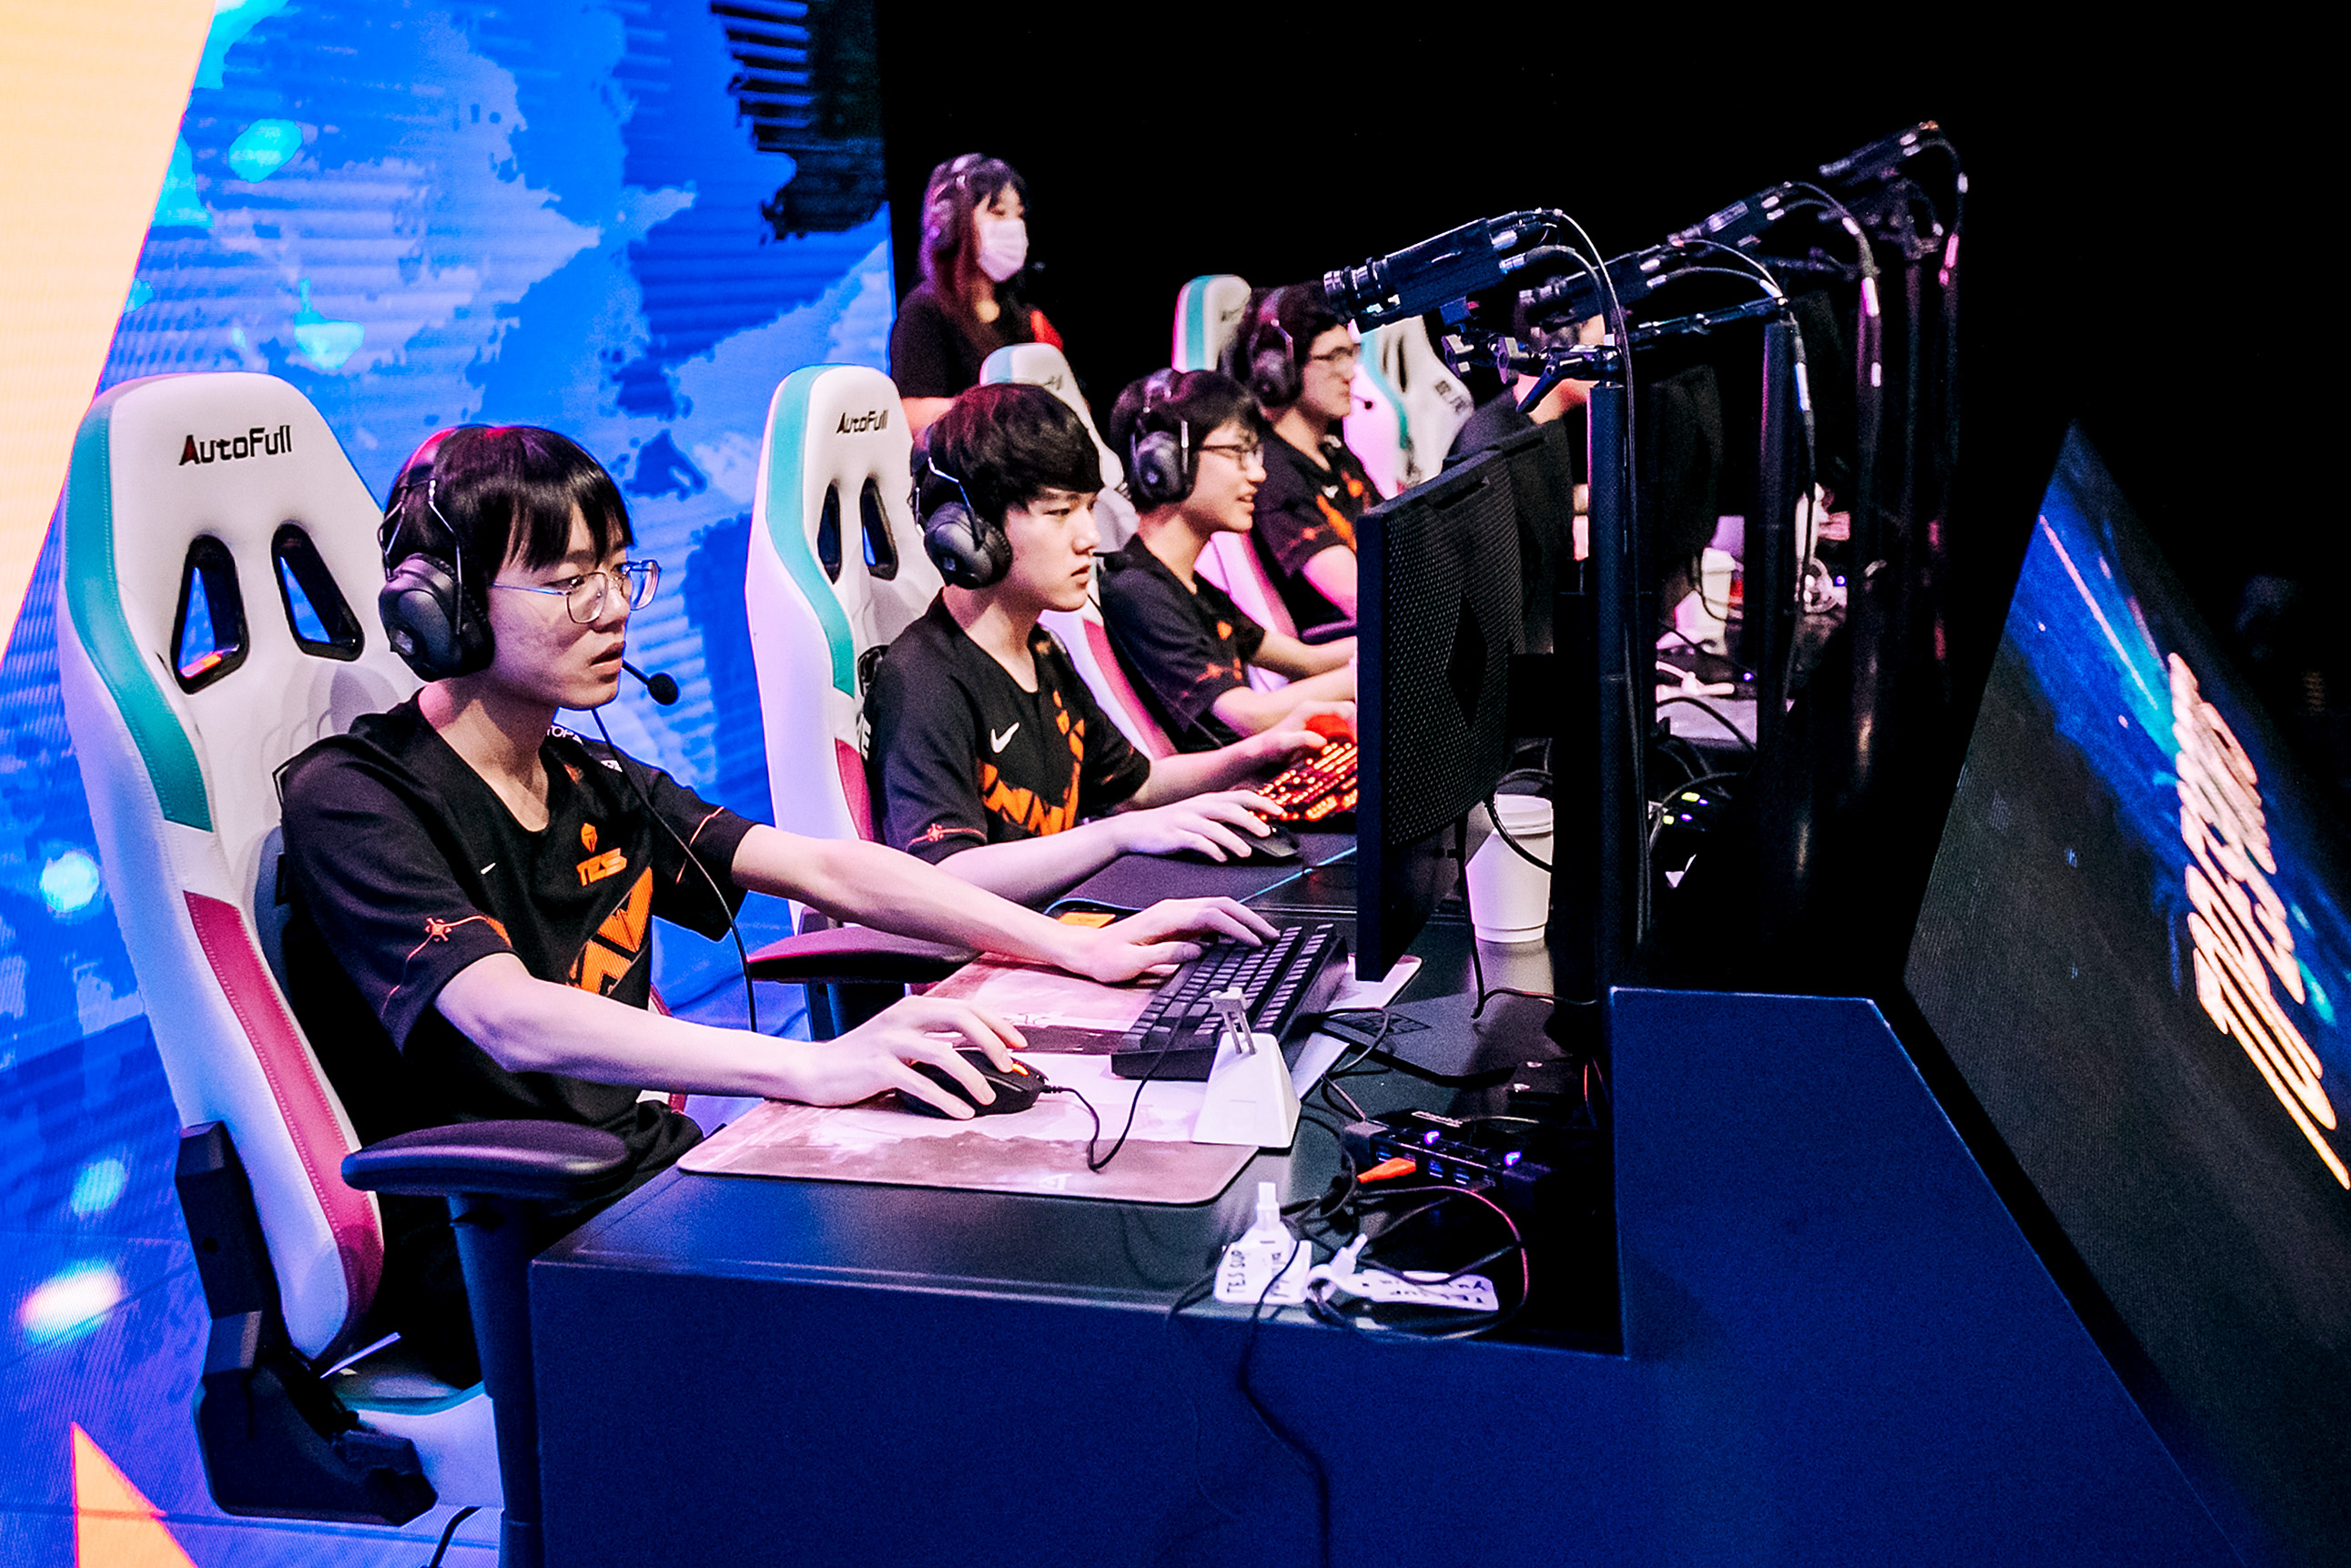 Three hours a week: Play time's over for China's young video gamers